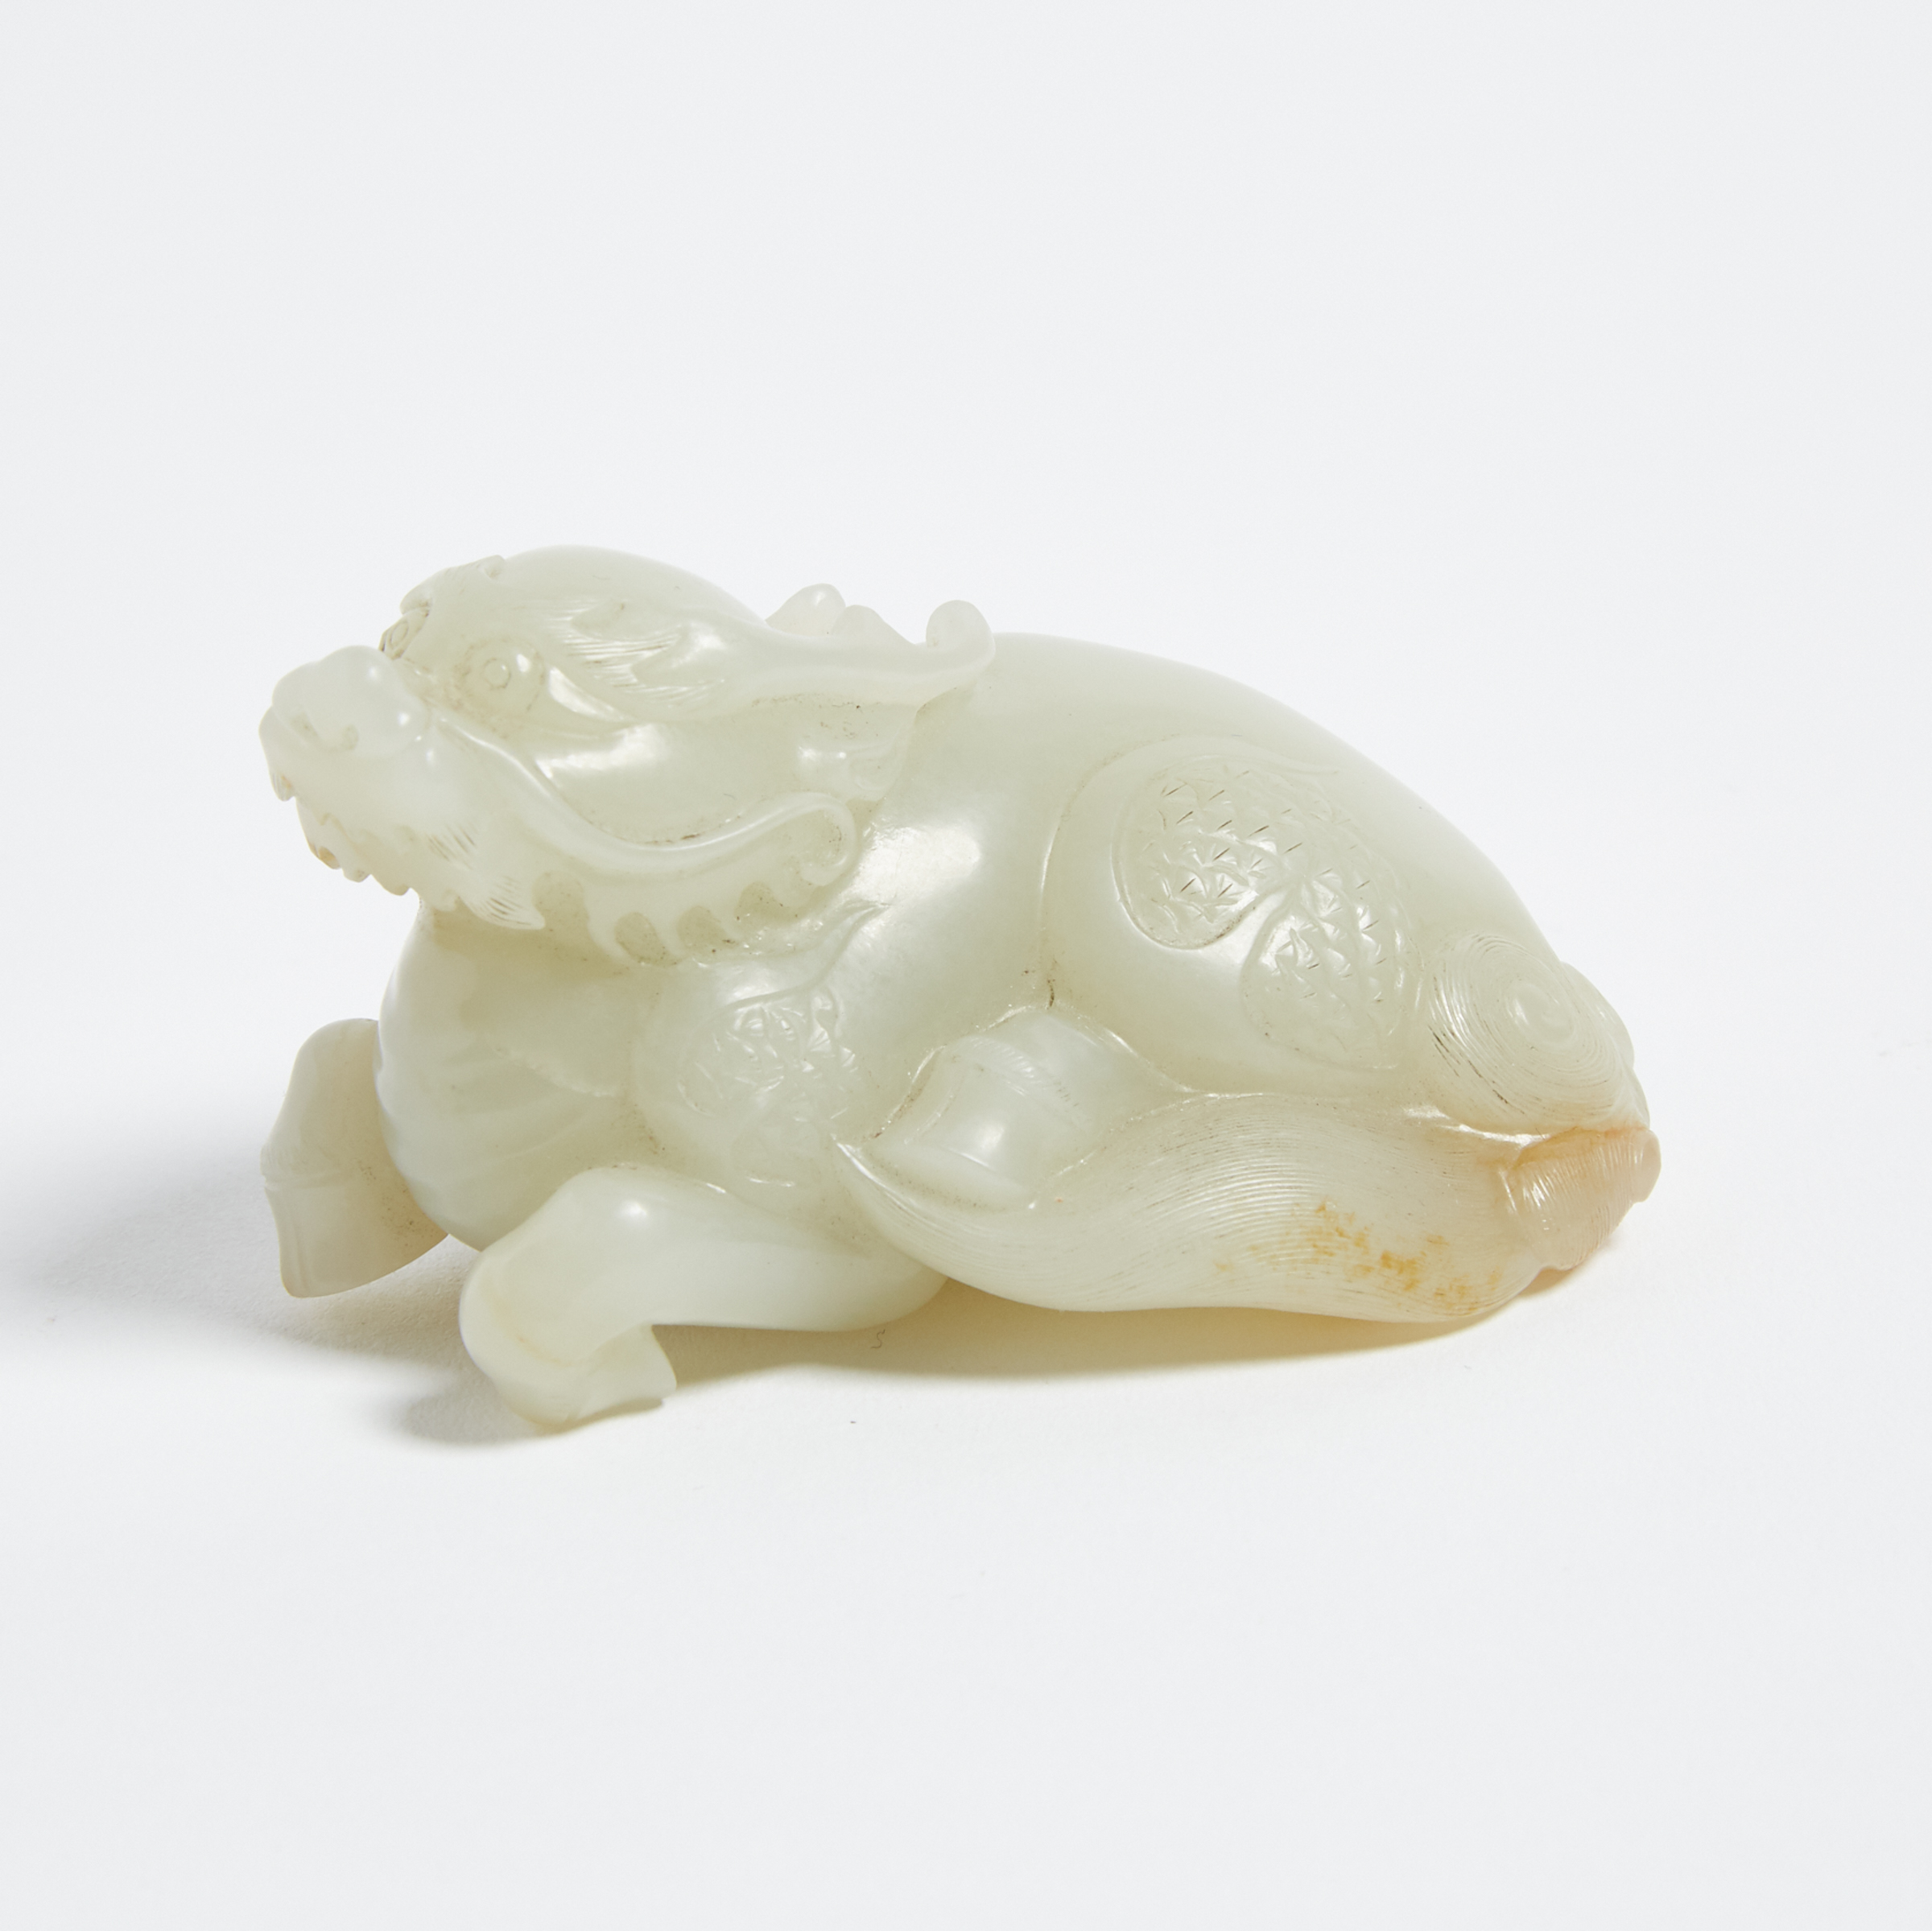 A White and Russet Jade Carved Qilin